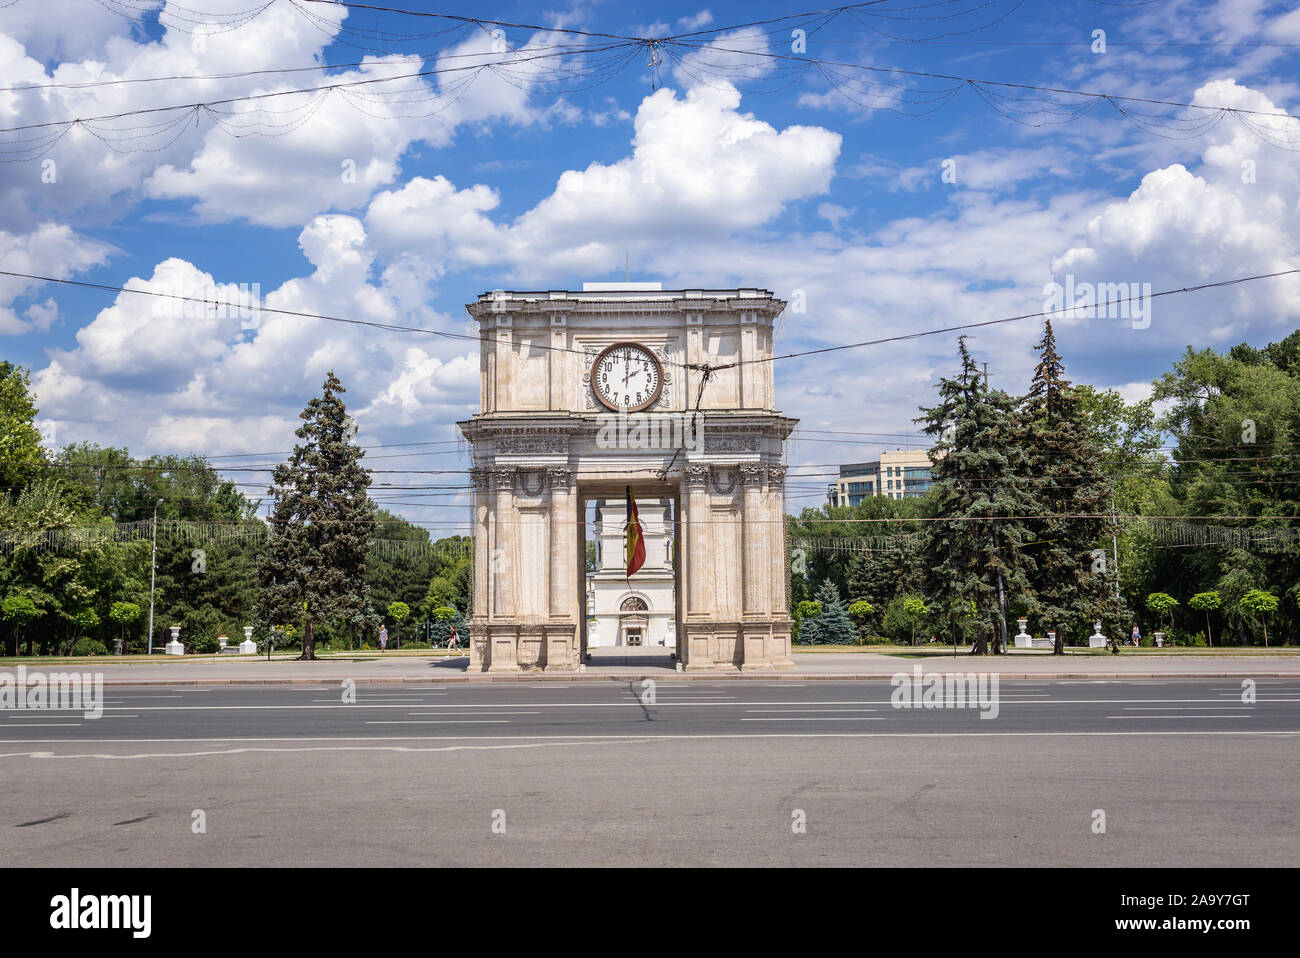 Triumphal arch on the Great National Assembly Square - central square of Chisinau, capital of the Republic of Moldova Stock Photo